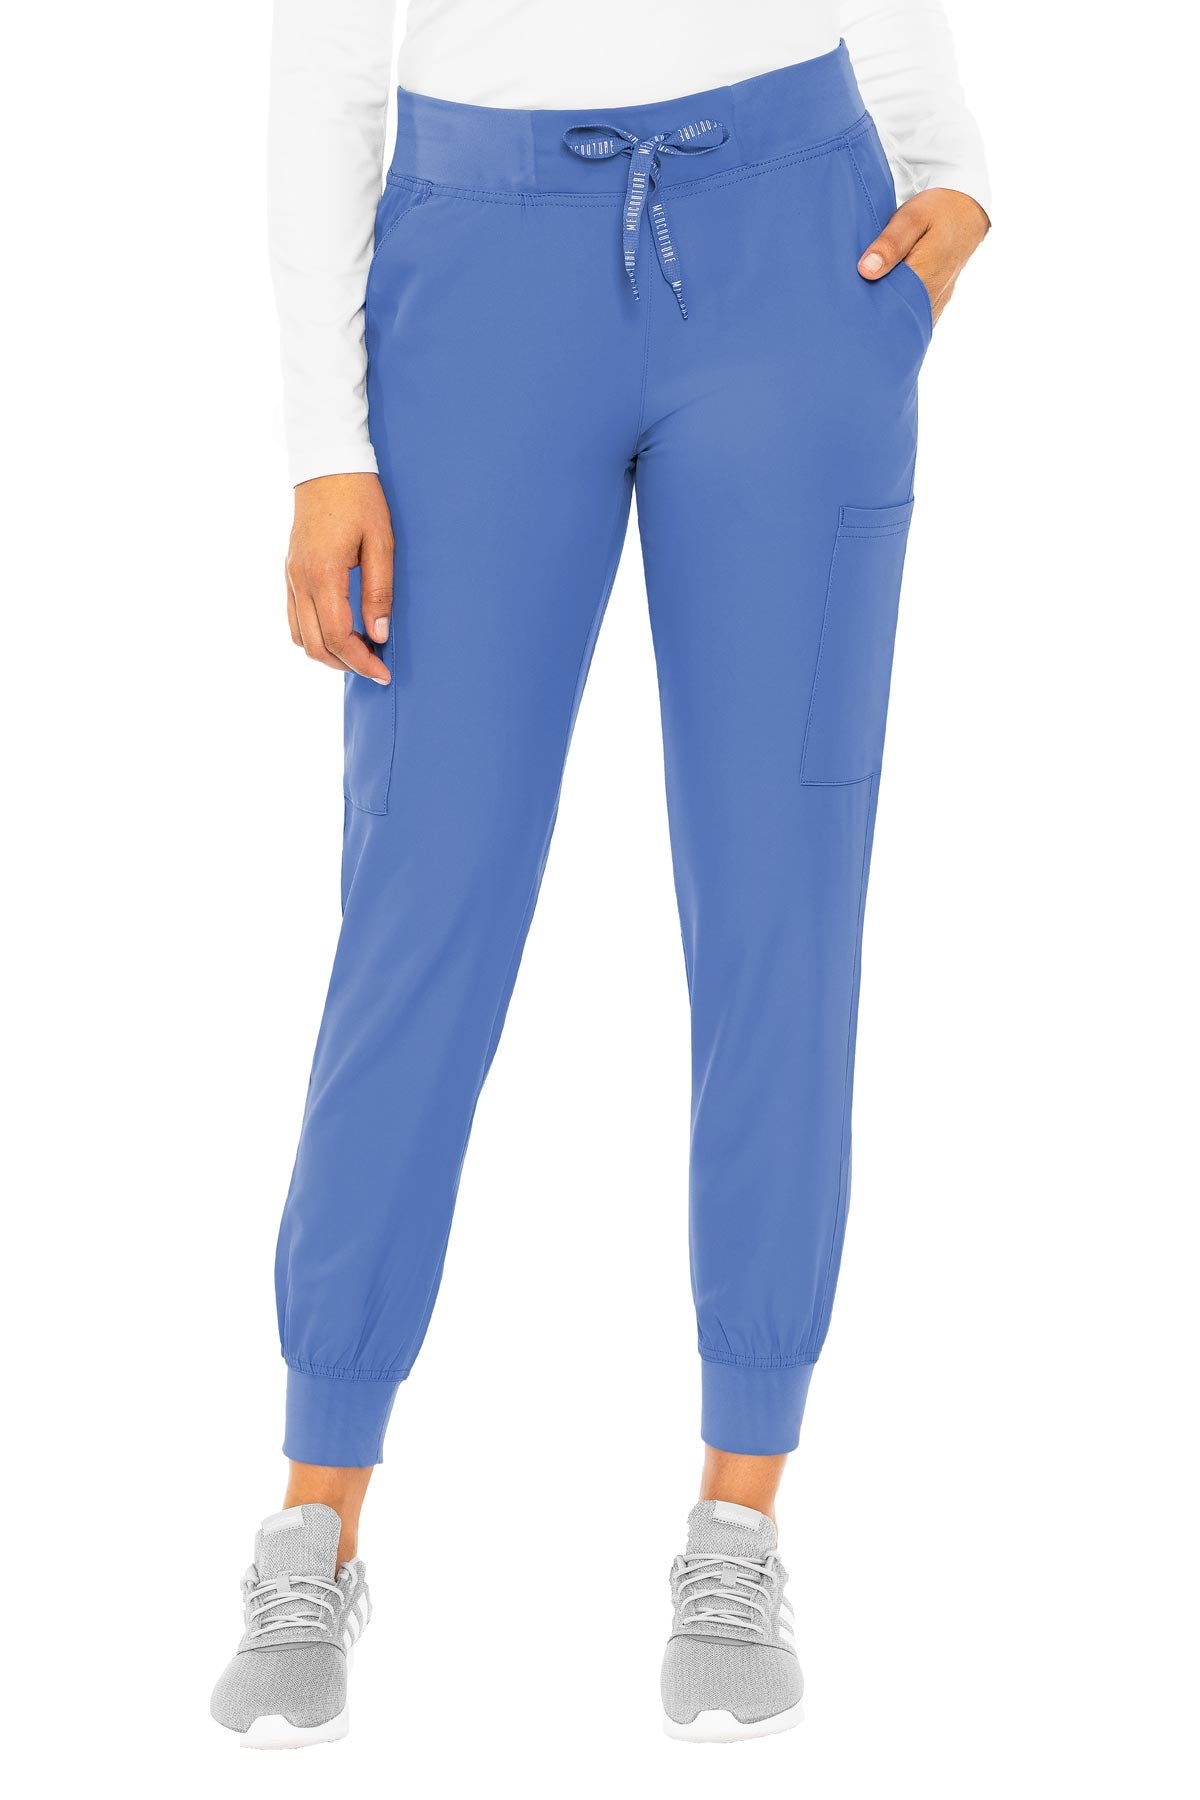 Med Couture 2711 Insight Women's Jogger Pant - TALL – Valley West